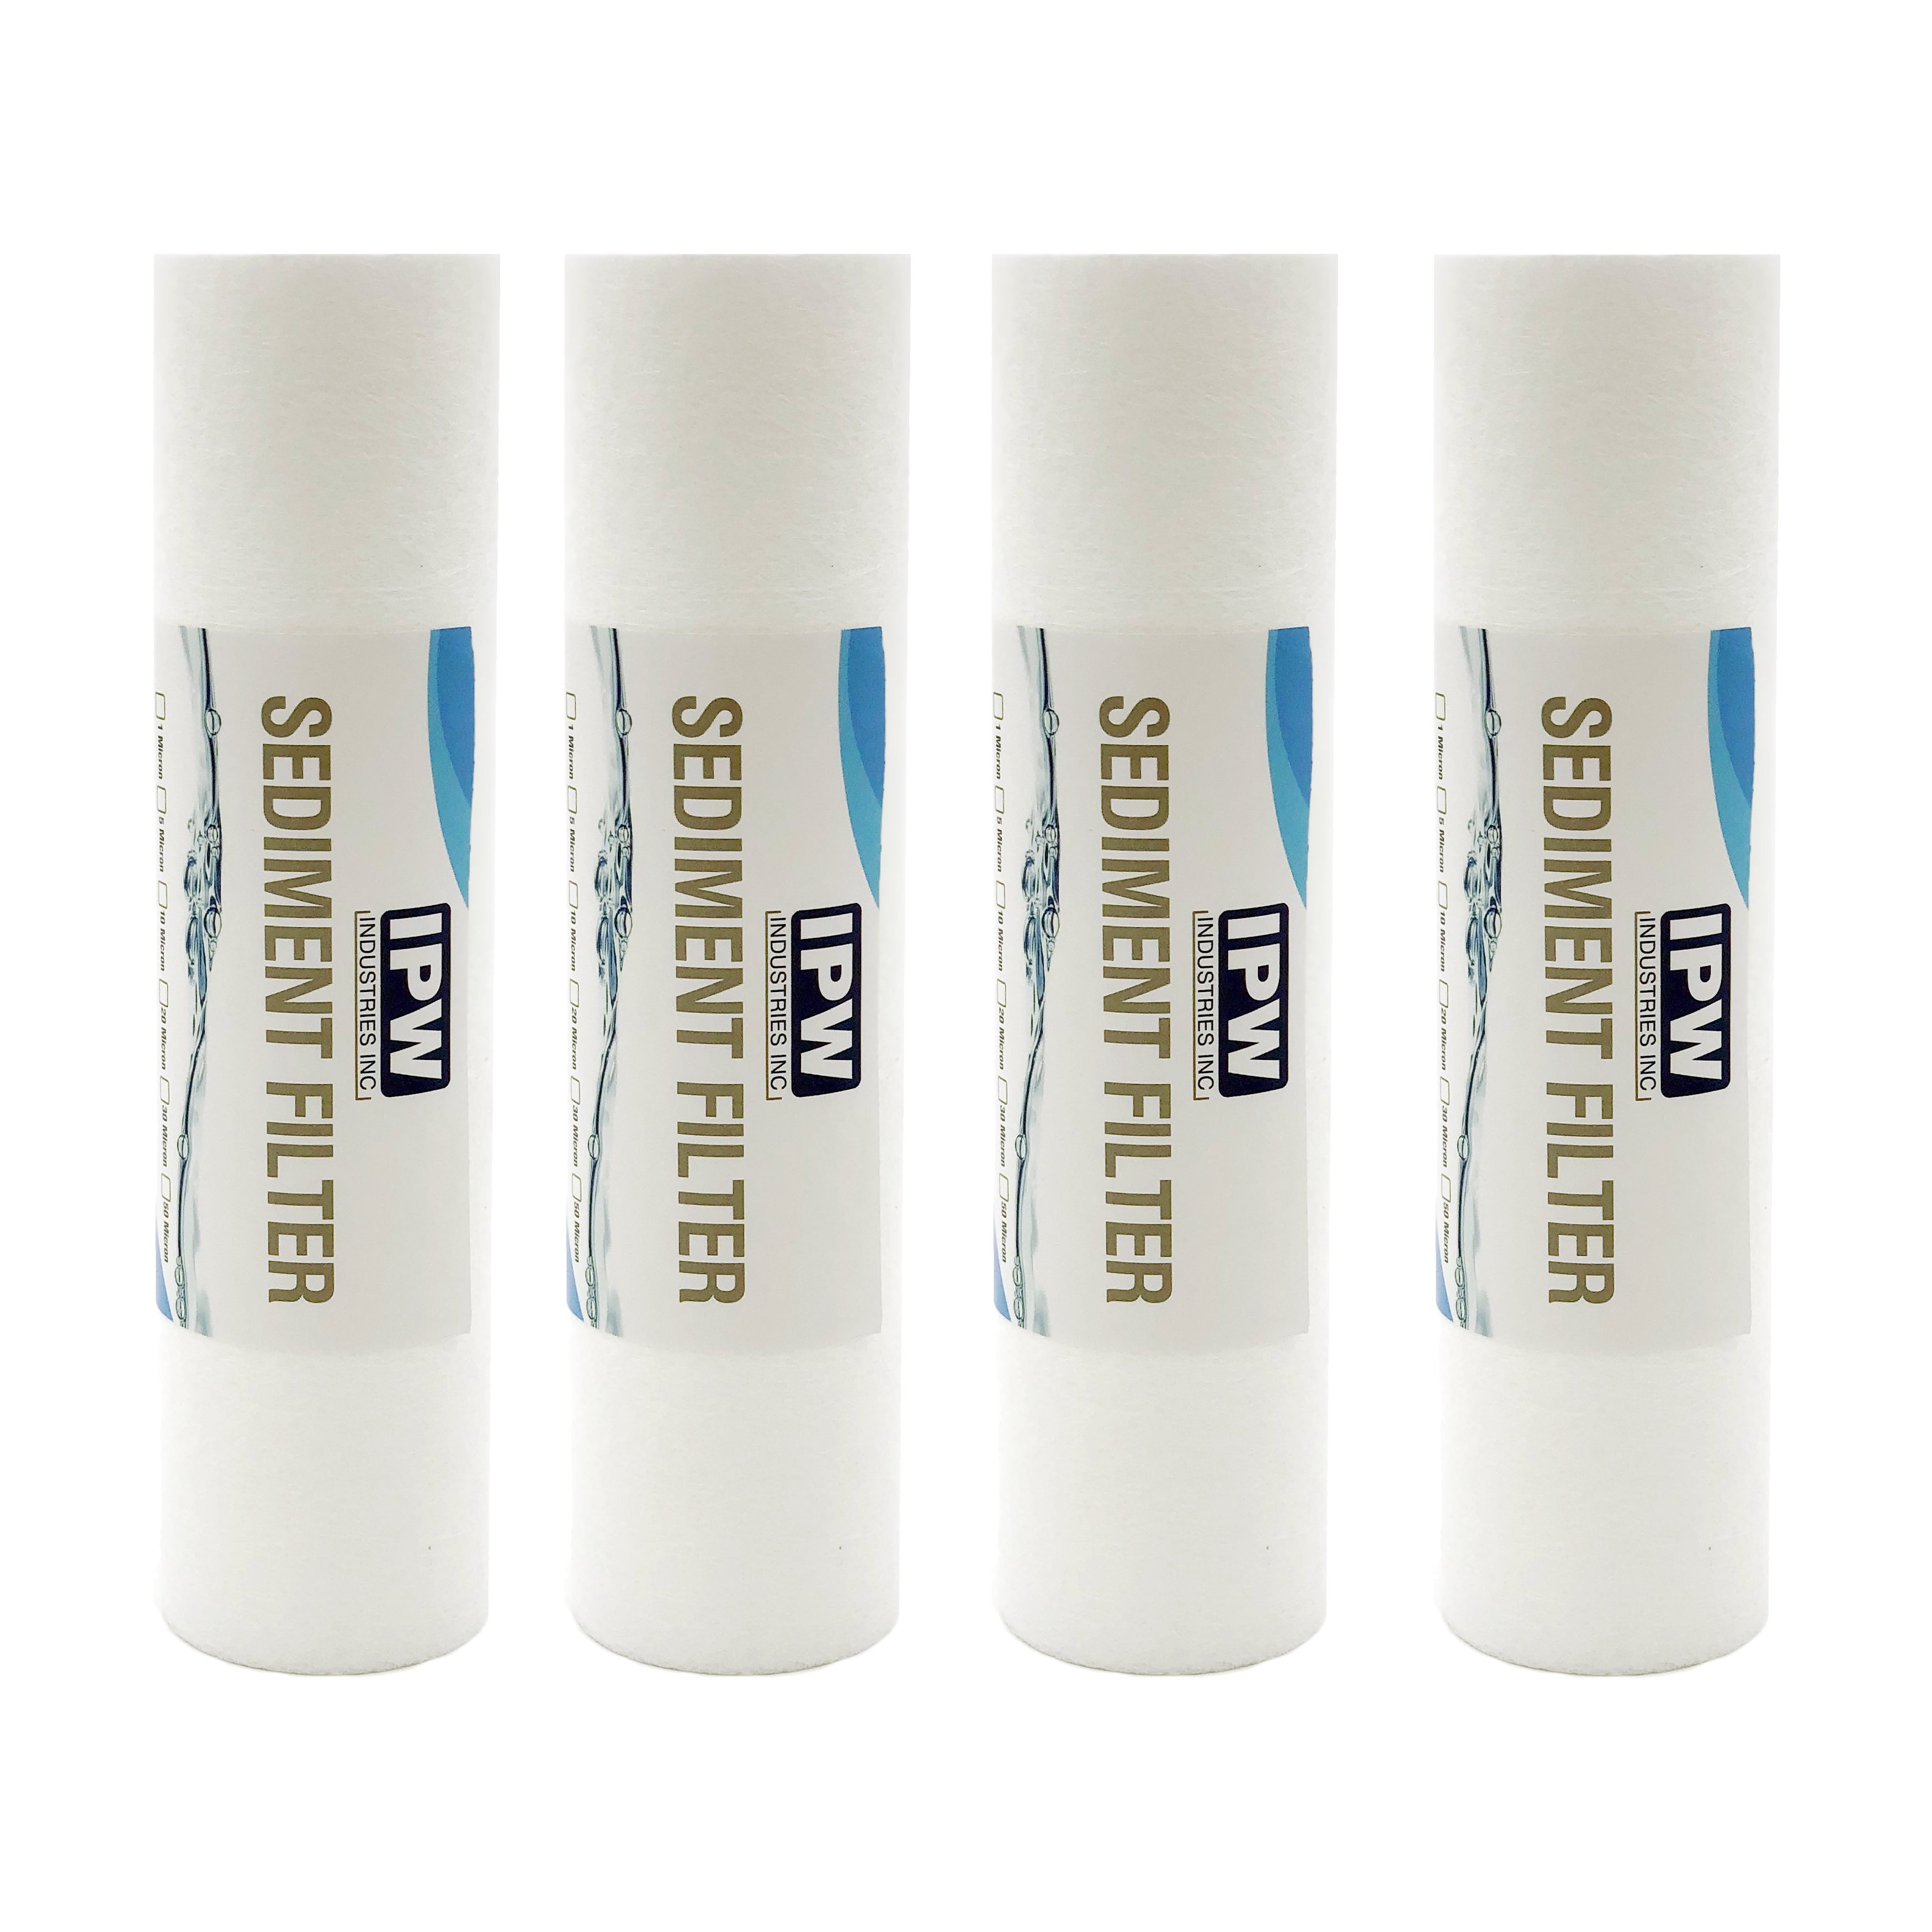 Pack Of 4 Sediment Filters 1 Micron Compatible To 9534-40 Ec110 Cartridges By Ipw Industries Inc.